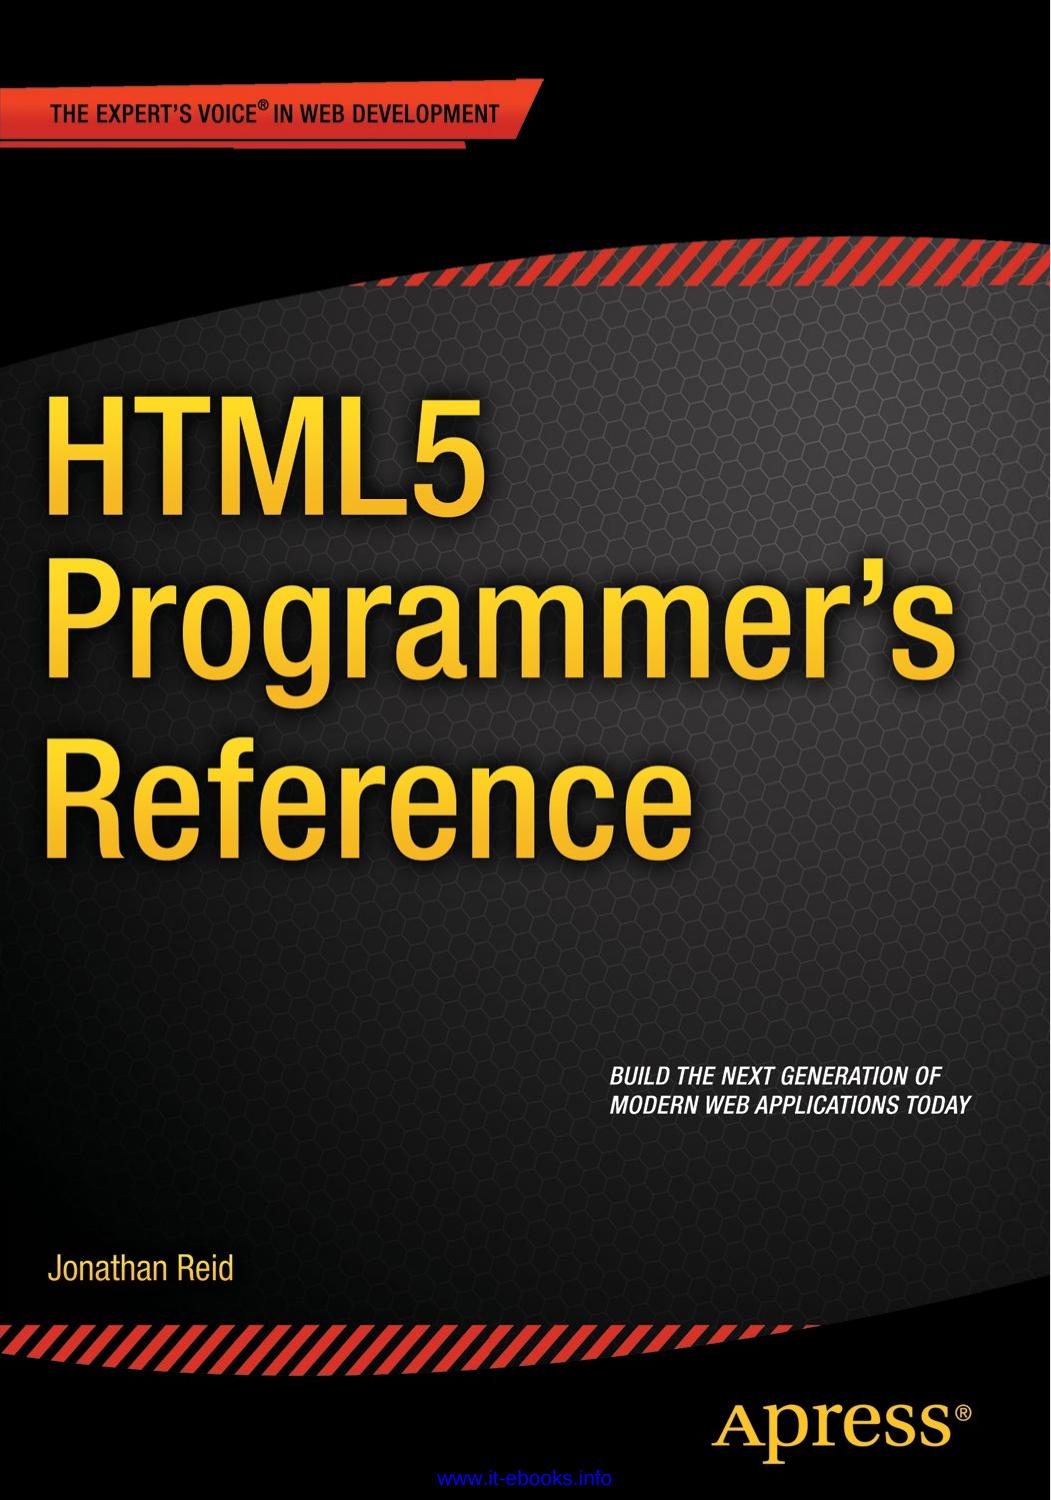 HTML5 Programmer's Reference by Jonathan Reid